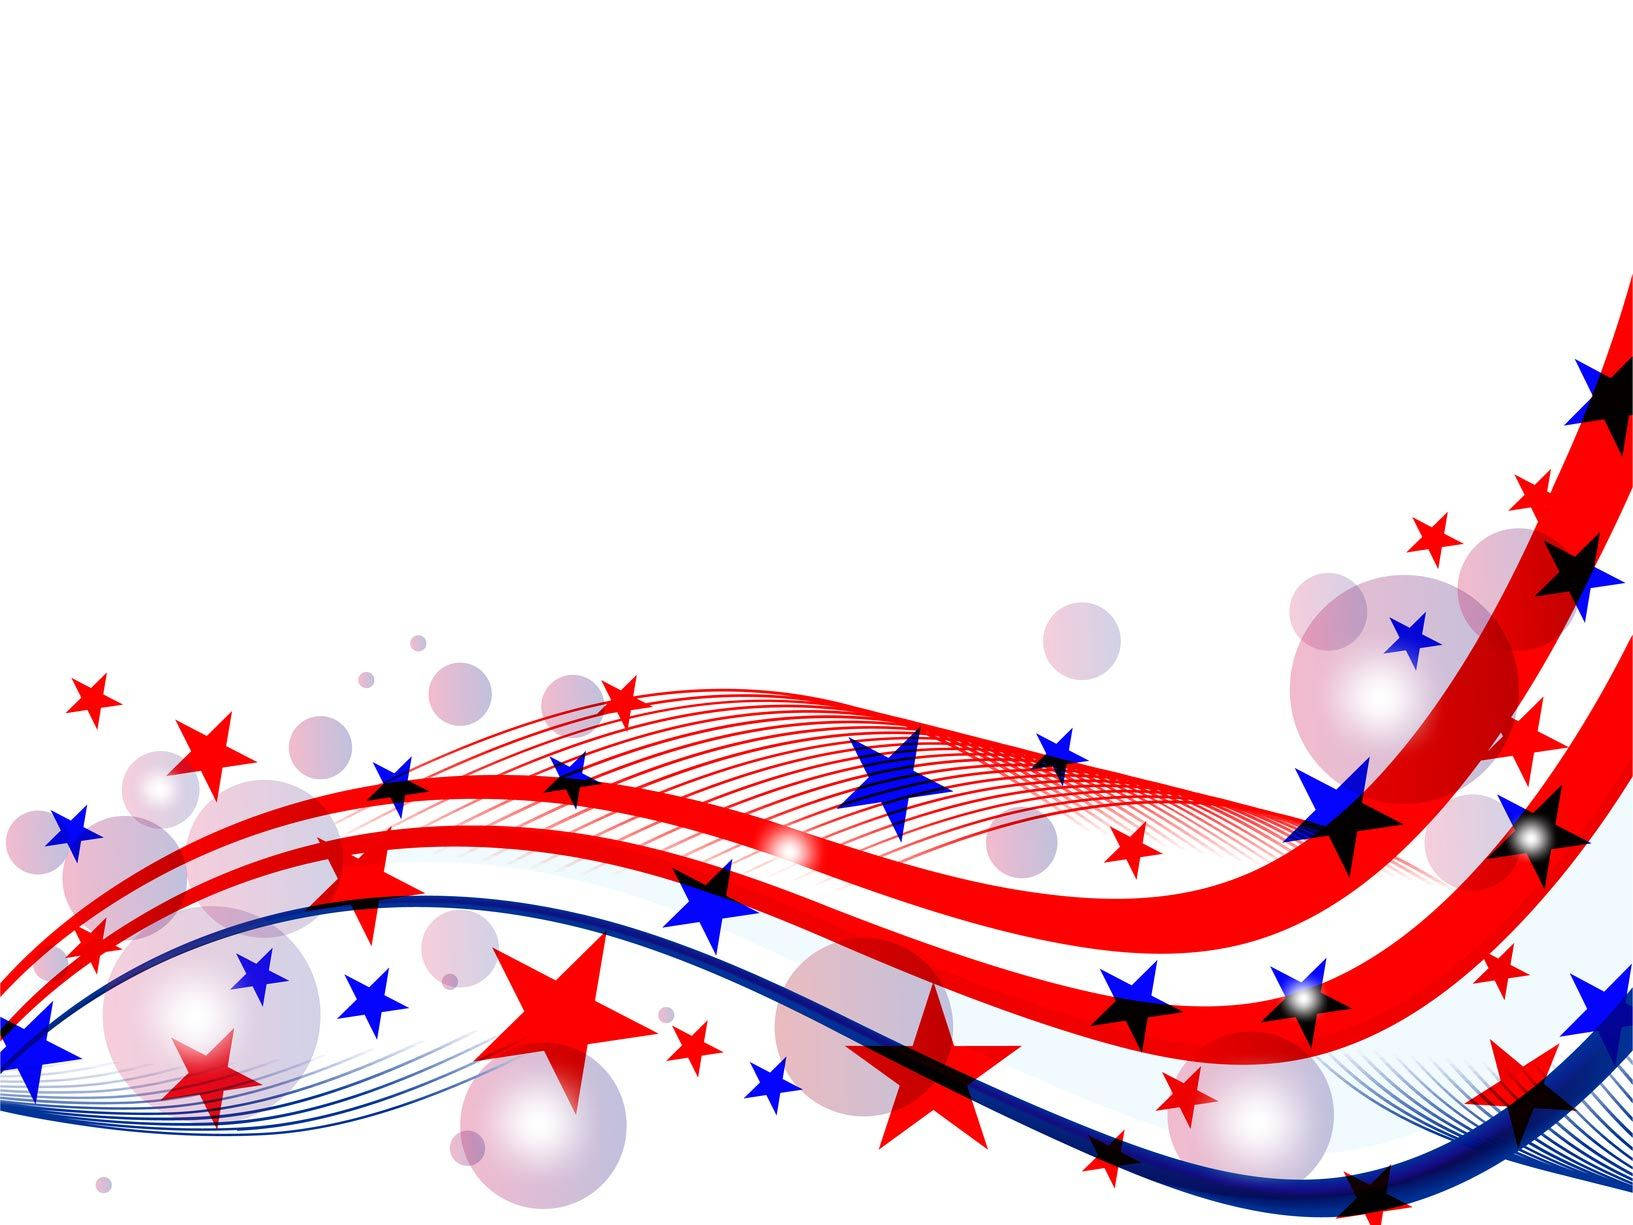 Show your pride in America with a 4th of July themed PowerPoint presentation. Wallpaper